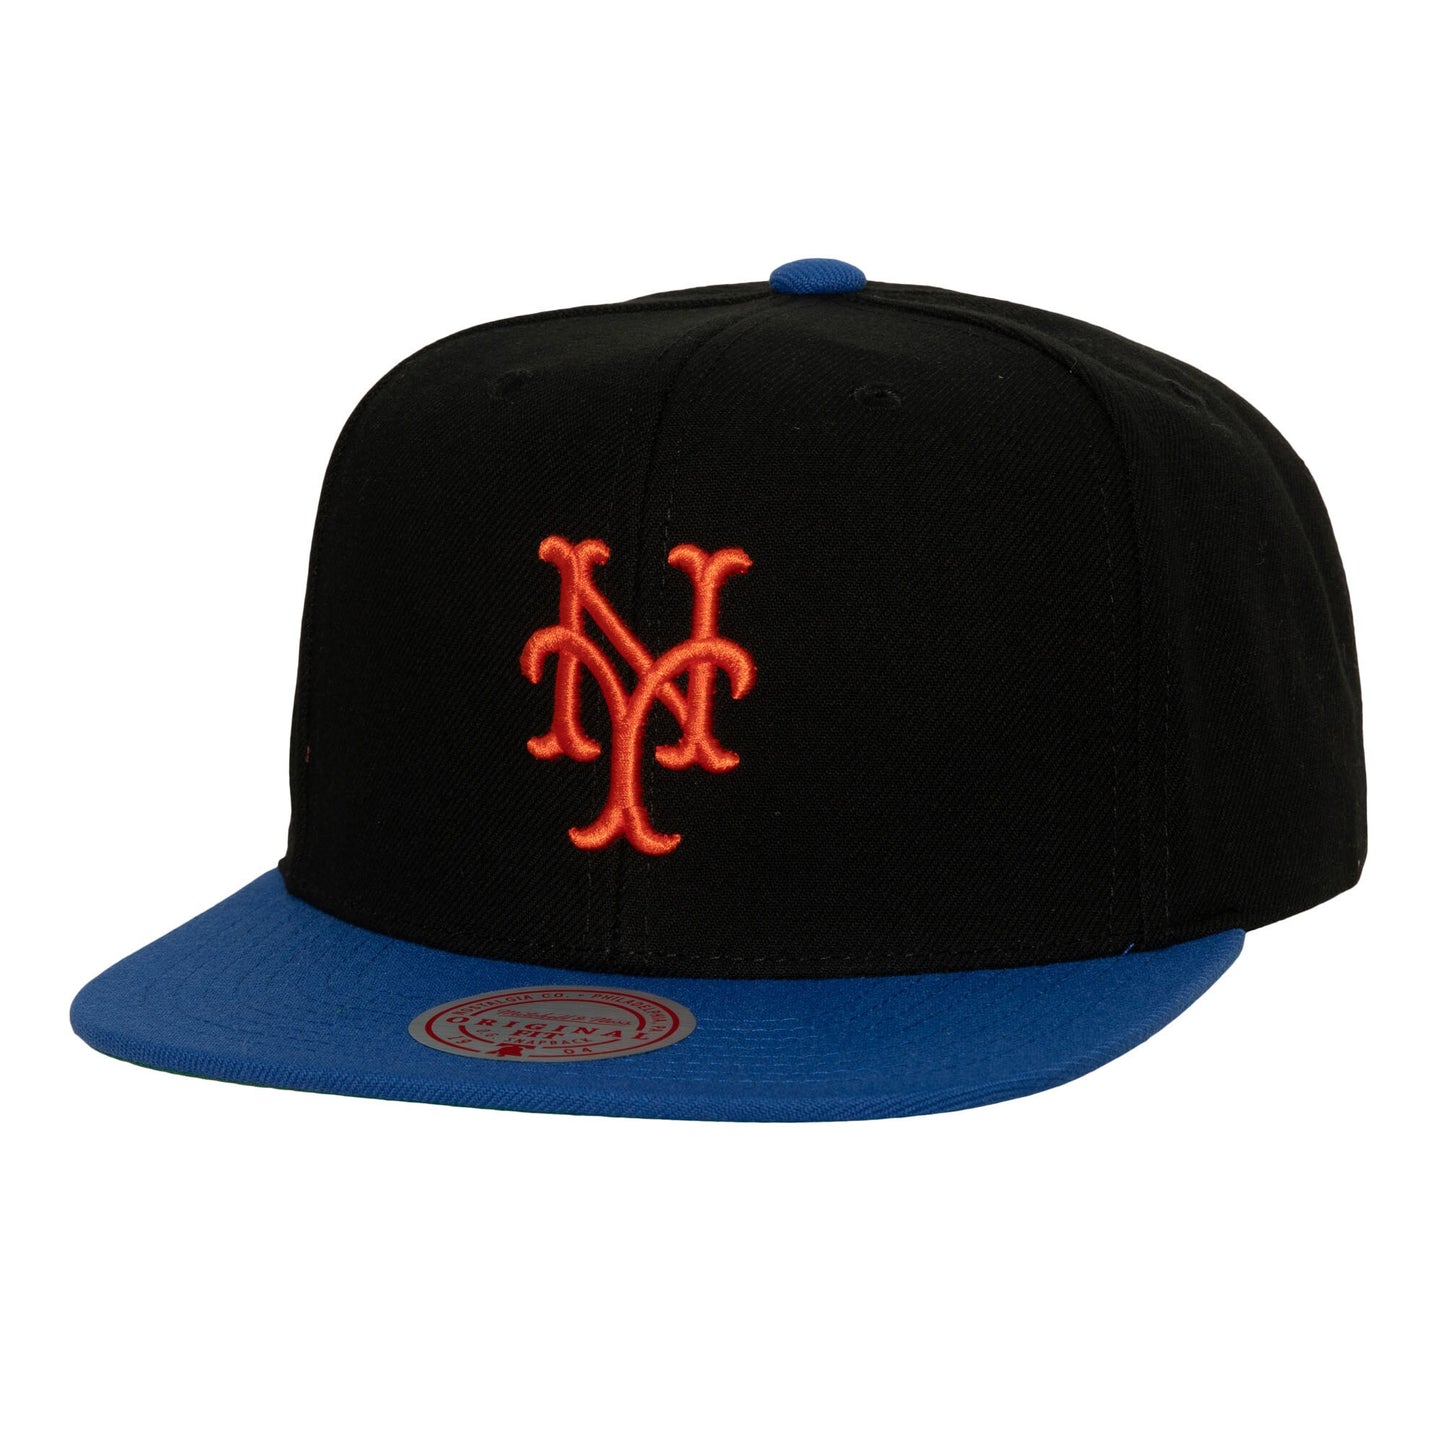 New York Mets Mitchell & Ness Cooperstown Collection Evergreen Snapback Hat - Black